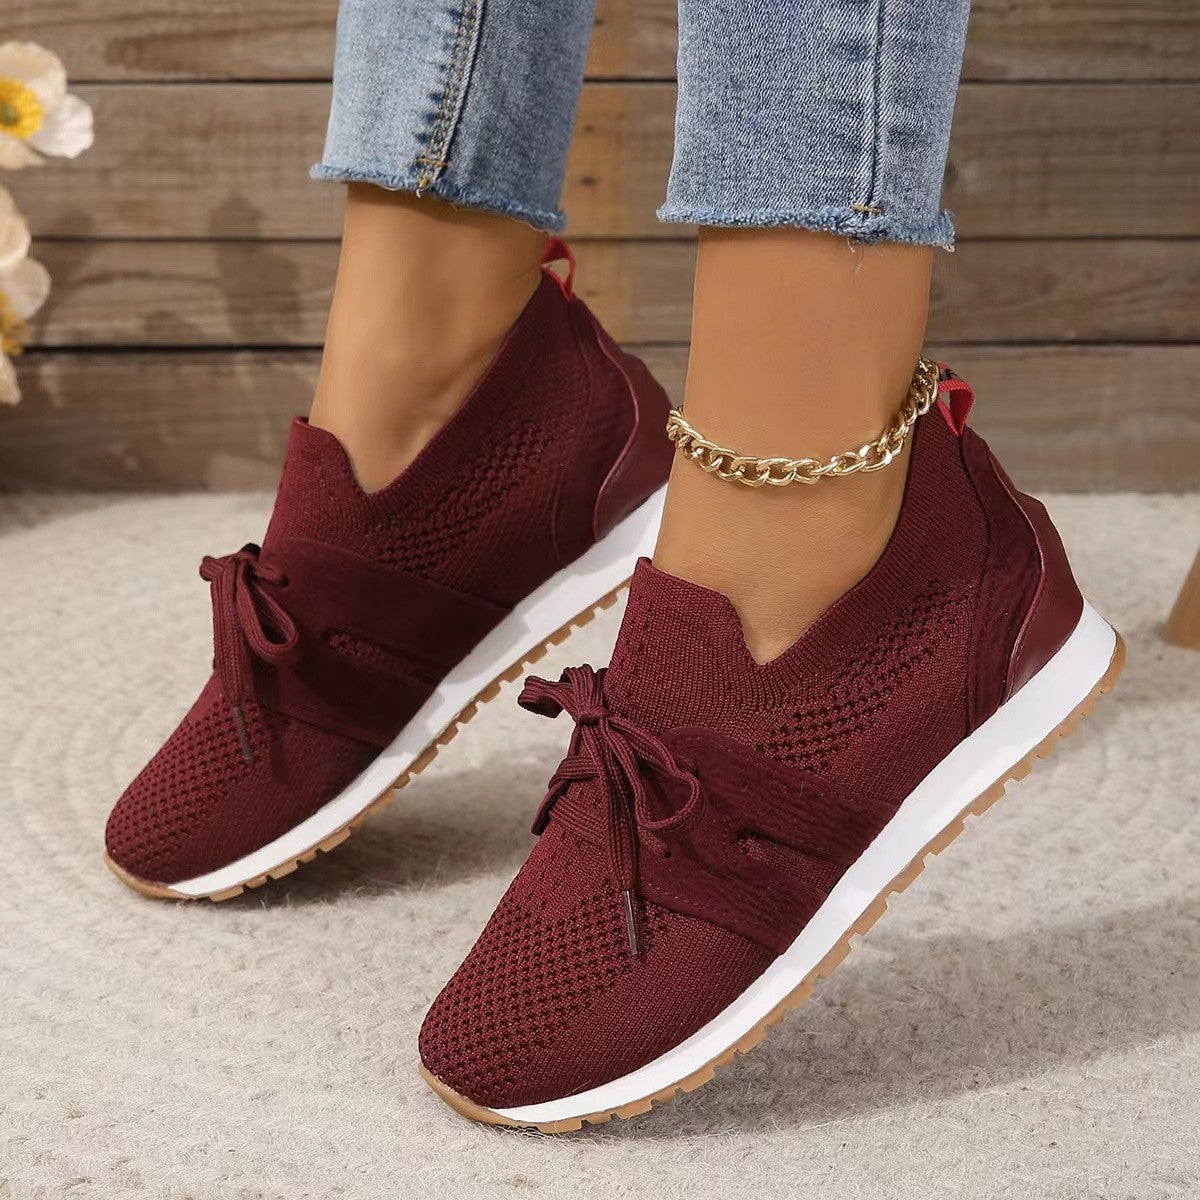 Women's Casual Shoes With Solid Color Sloping Heels For Comfort